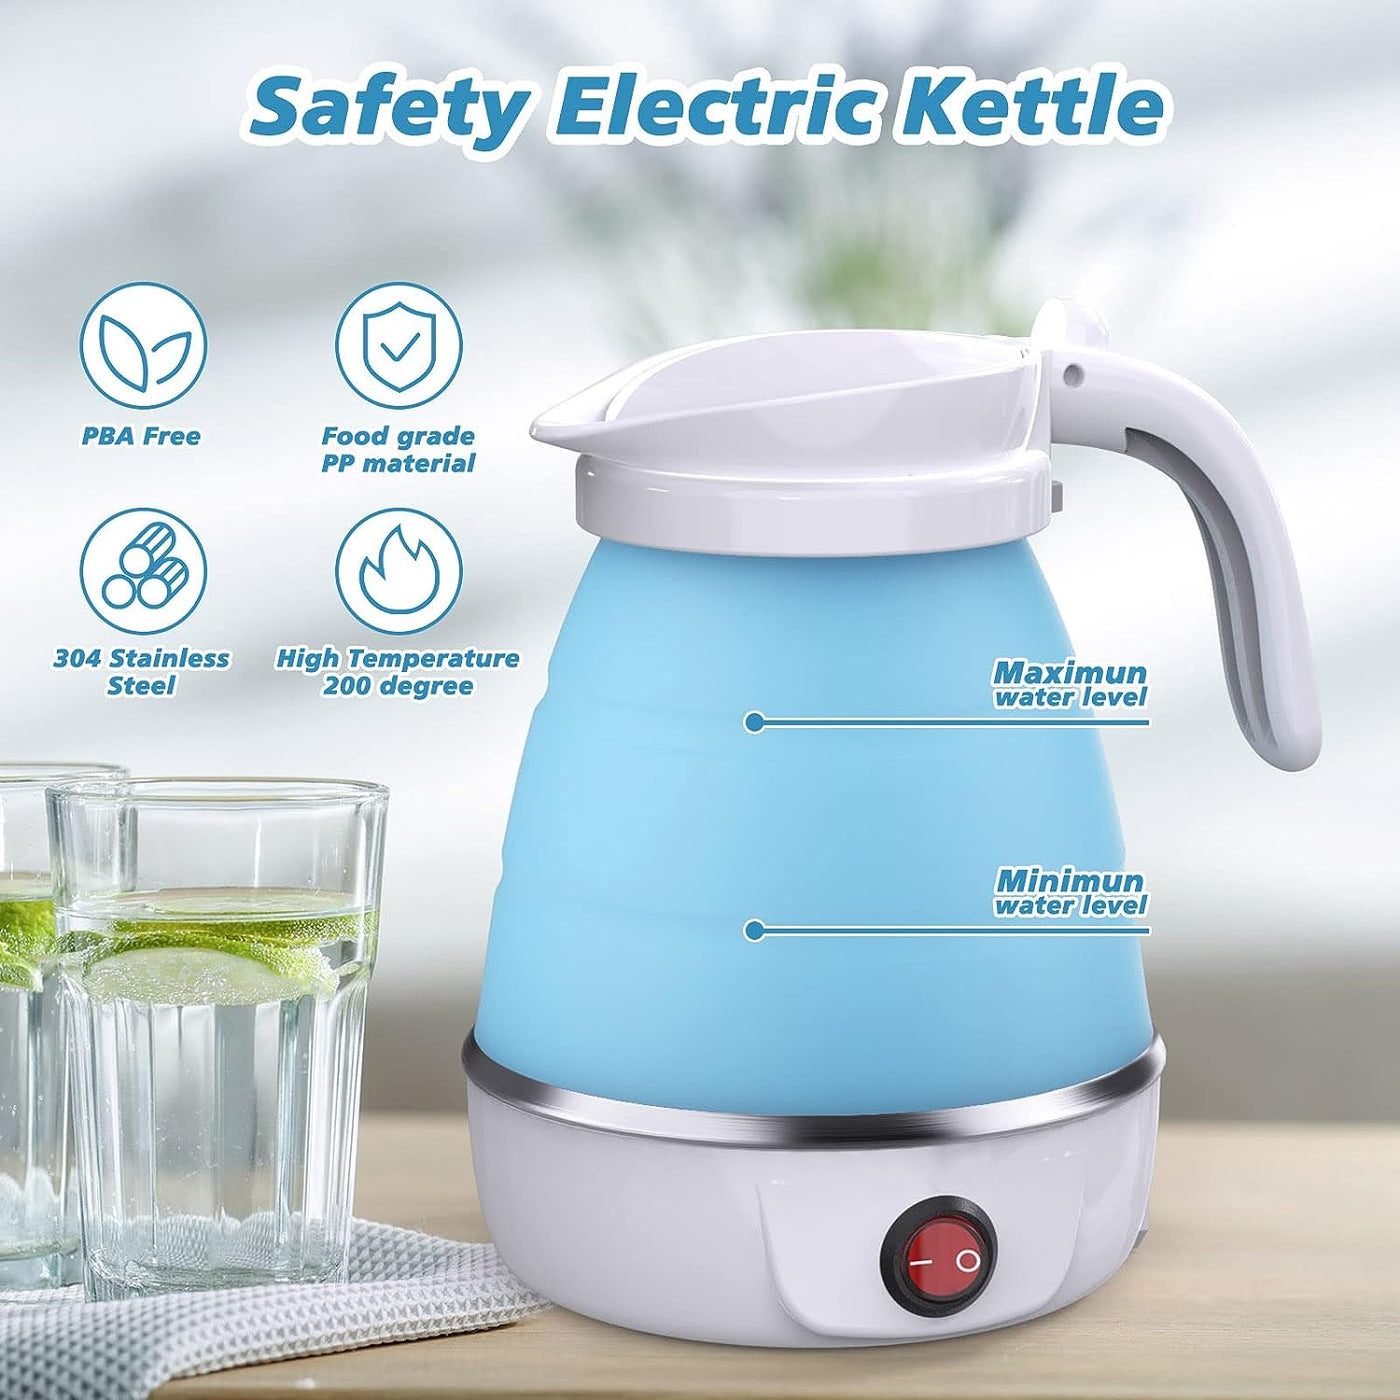 Foldable portable travel kettle, electric small kettle, camping